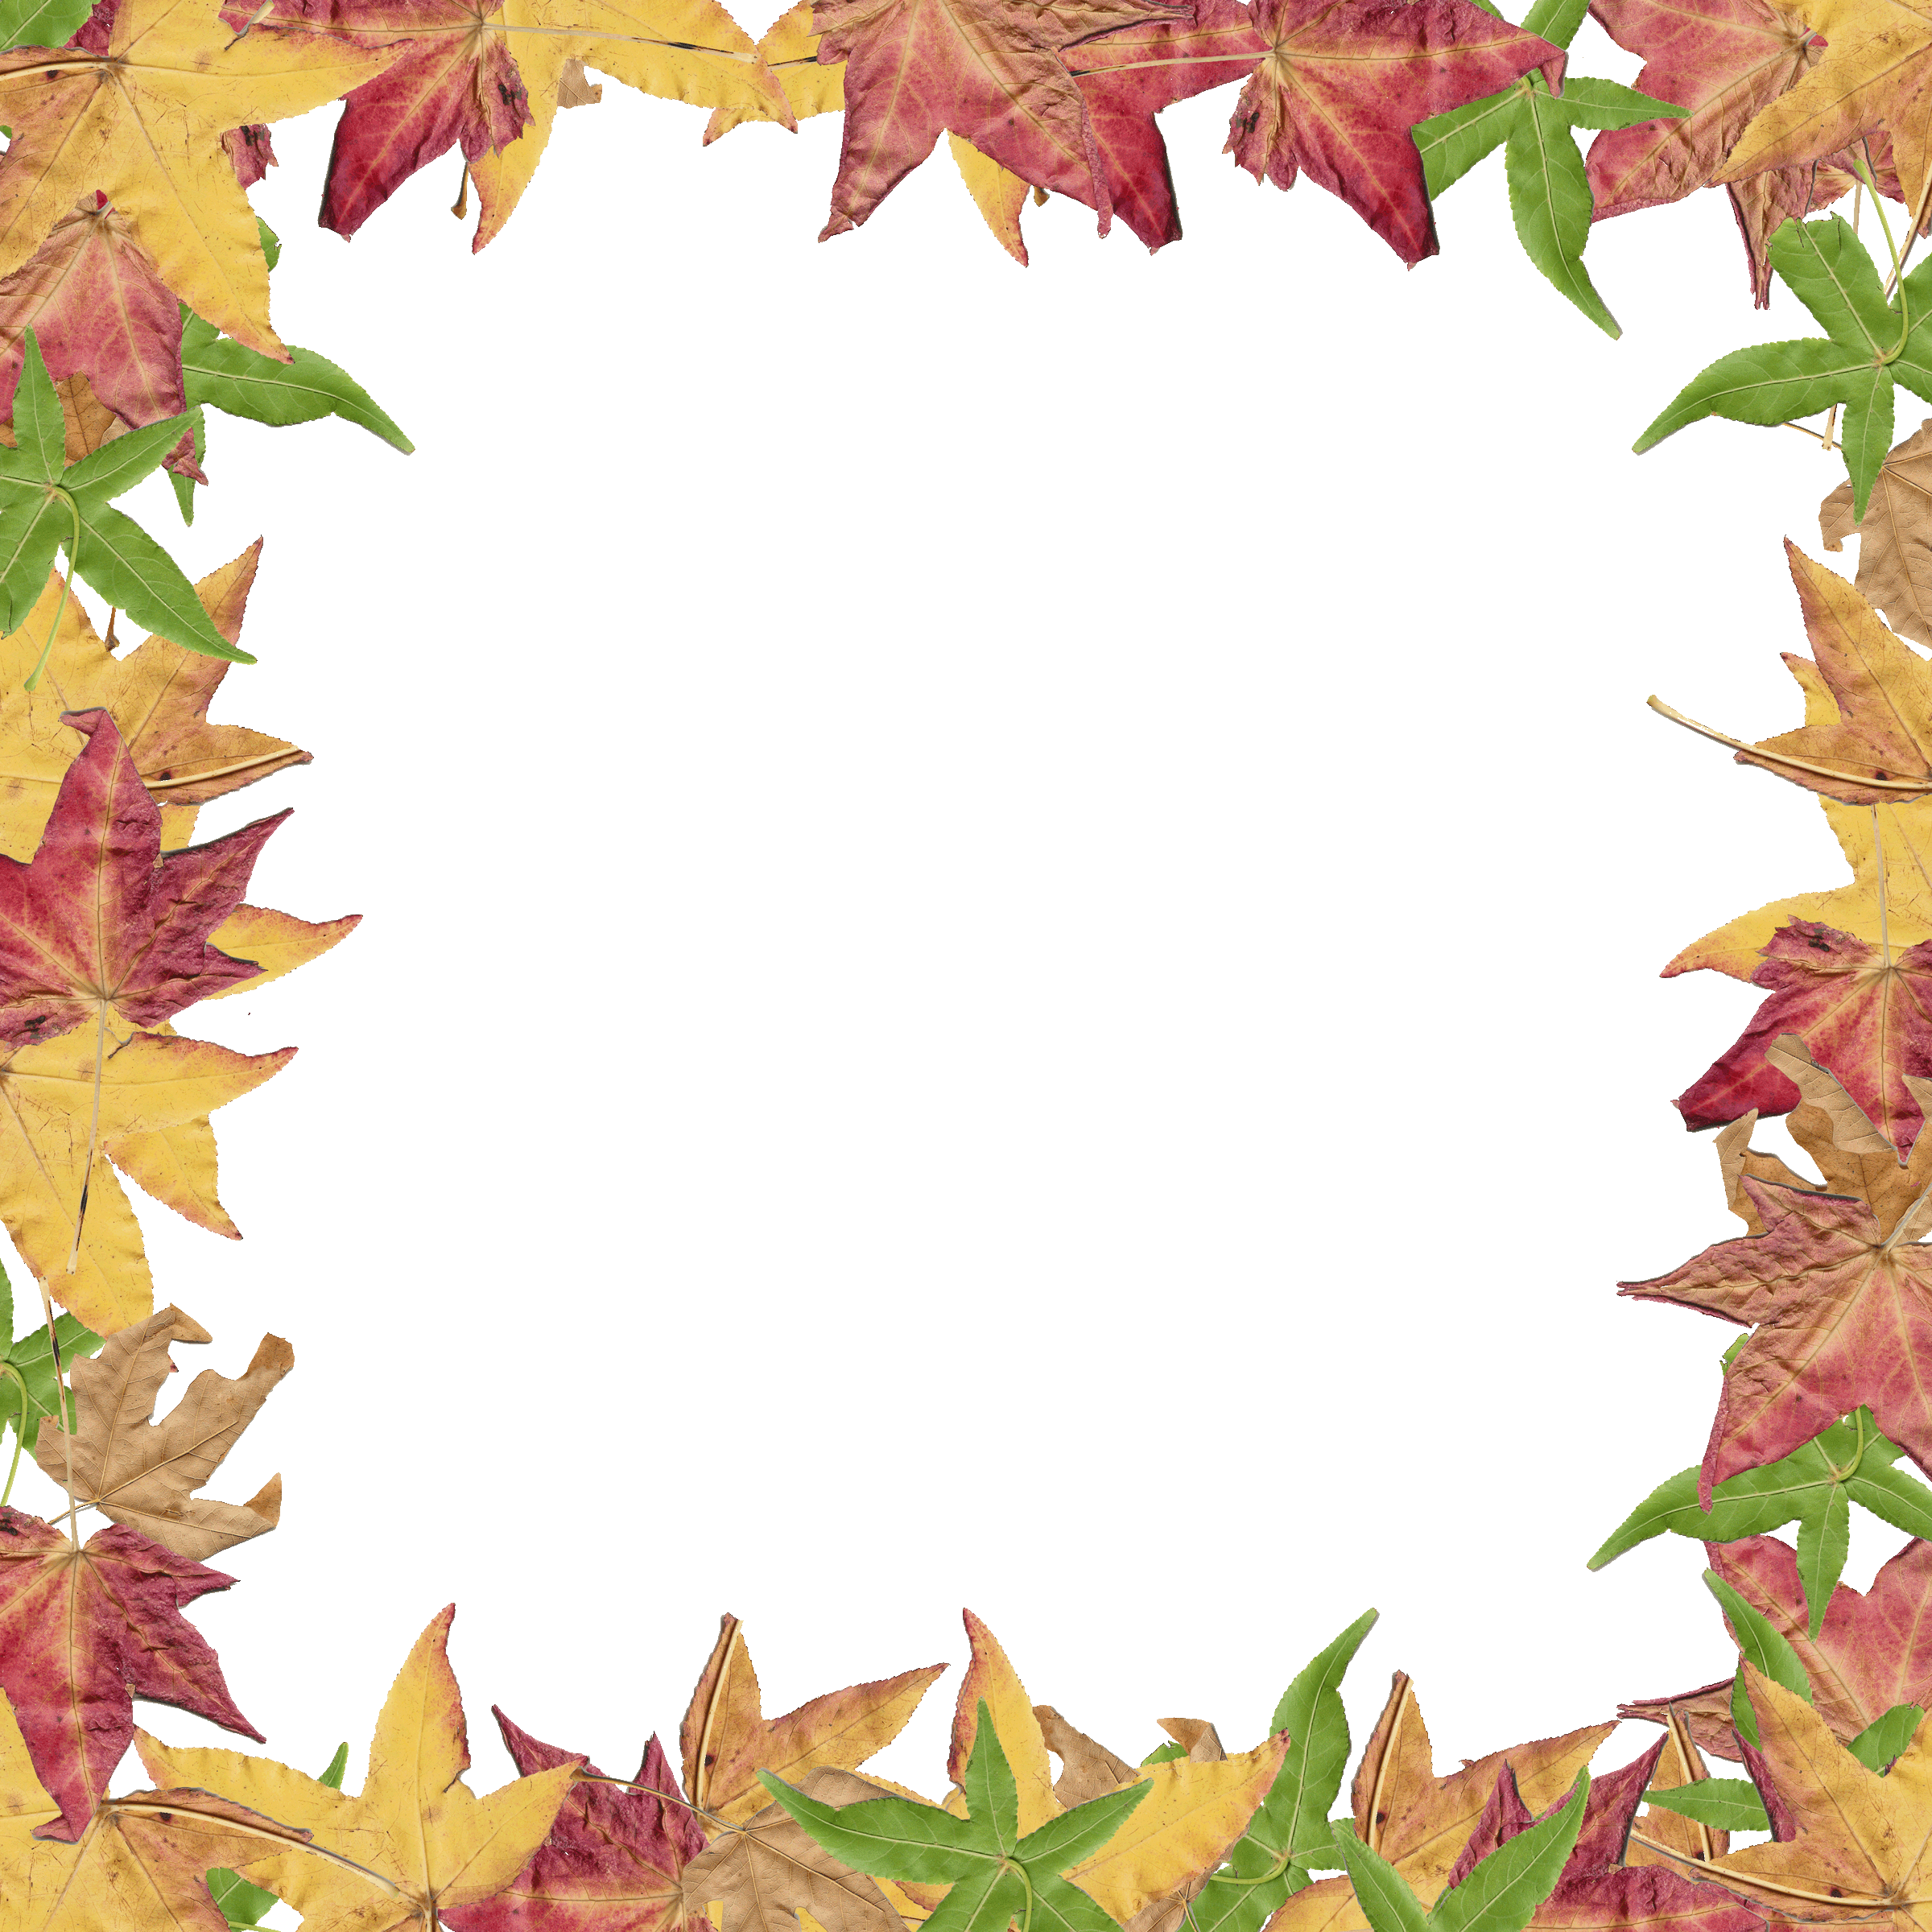 Leaf Page Borders Free - ClipArt Best